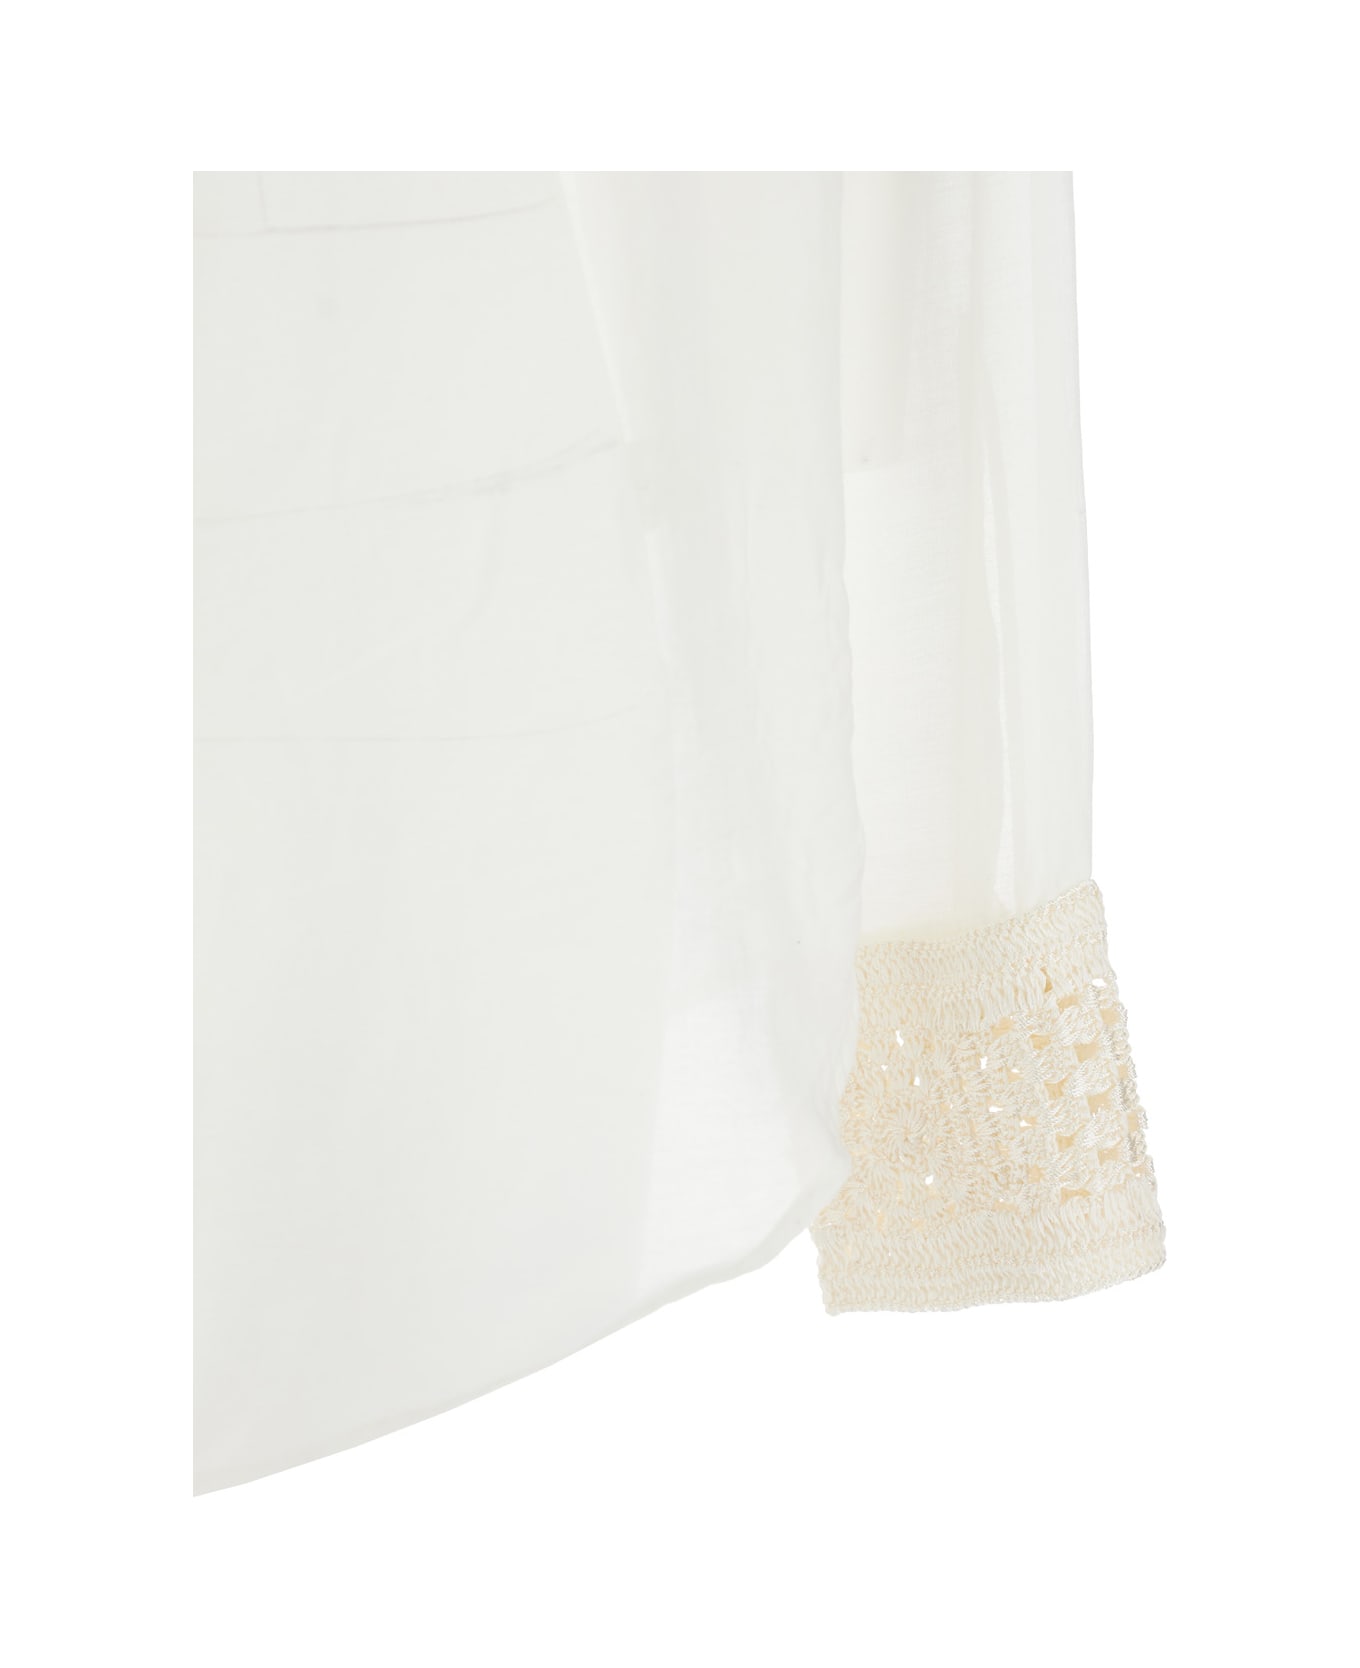 Forte_Forte White Shirt With Pearls Details In Cotton And Silk Woman - White シャツ